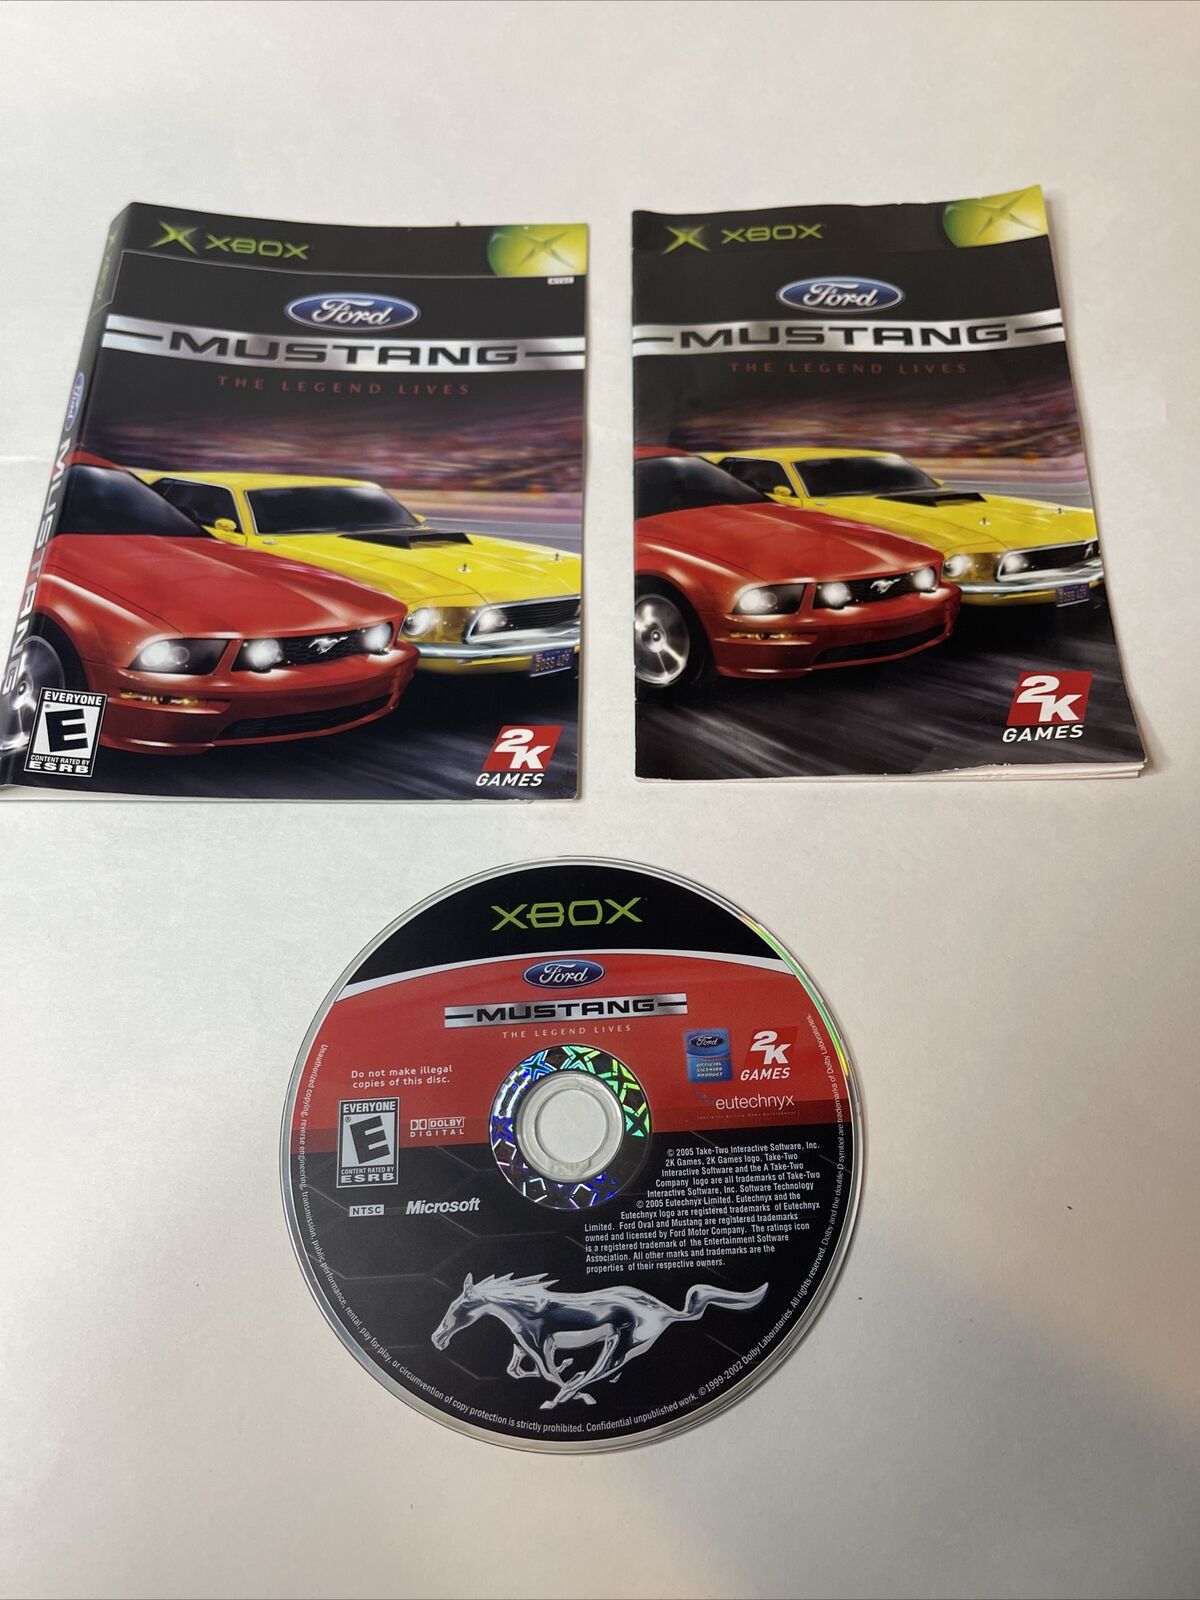 Ford Mustang: The Legend Lives (Microsoft Xbox, 2005) Disc Manual Art TESTED